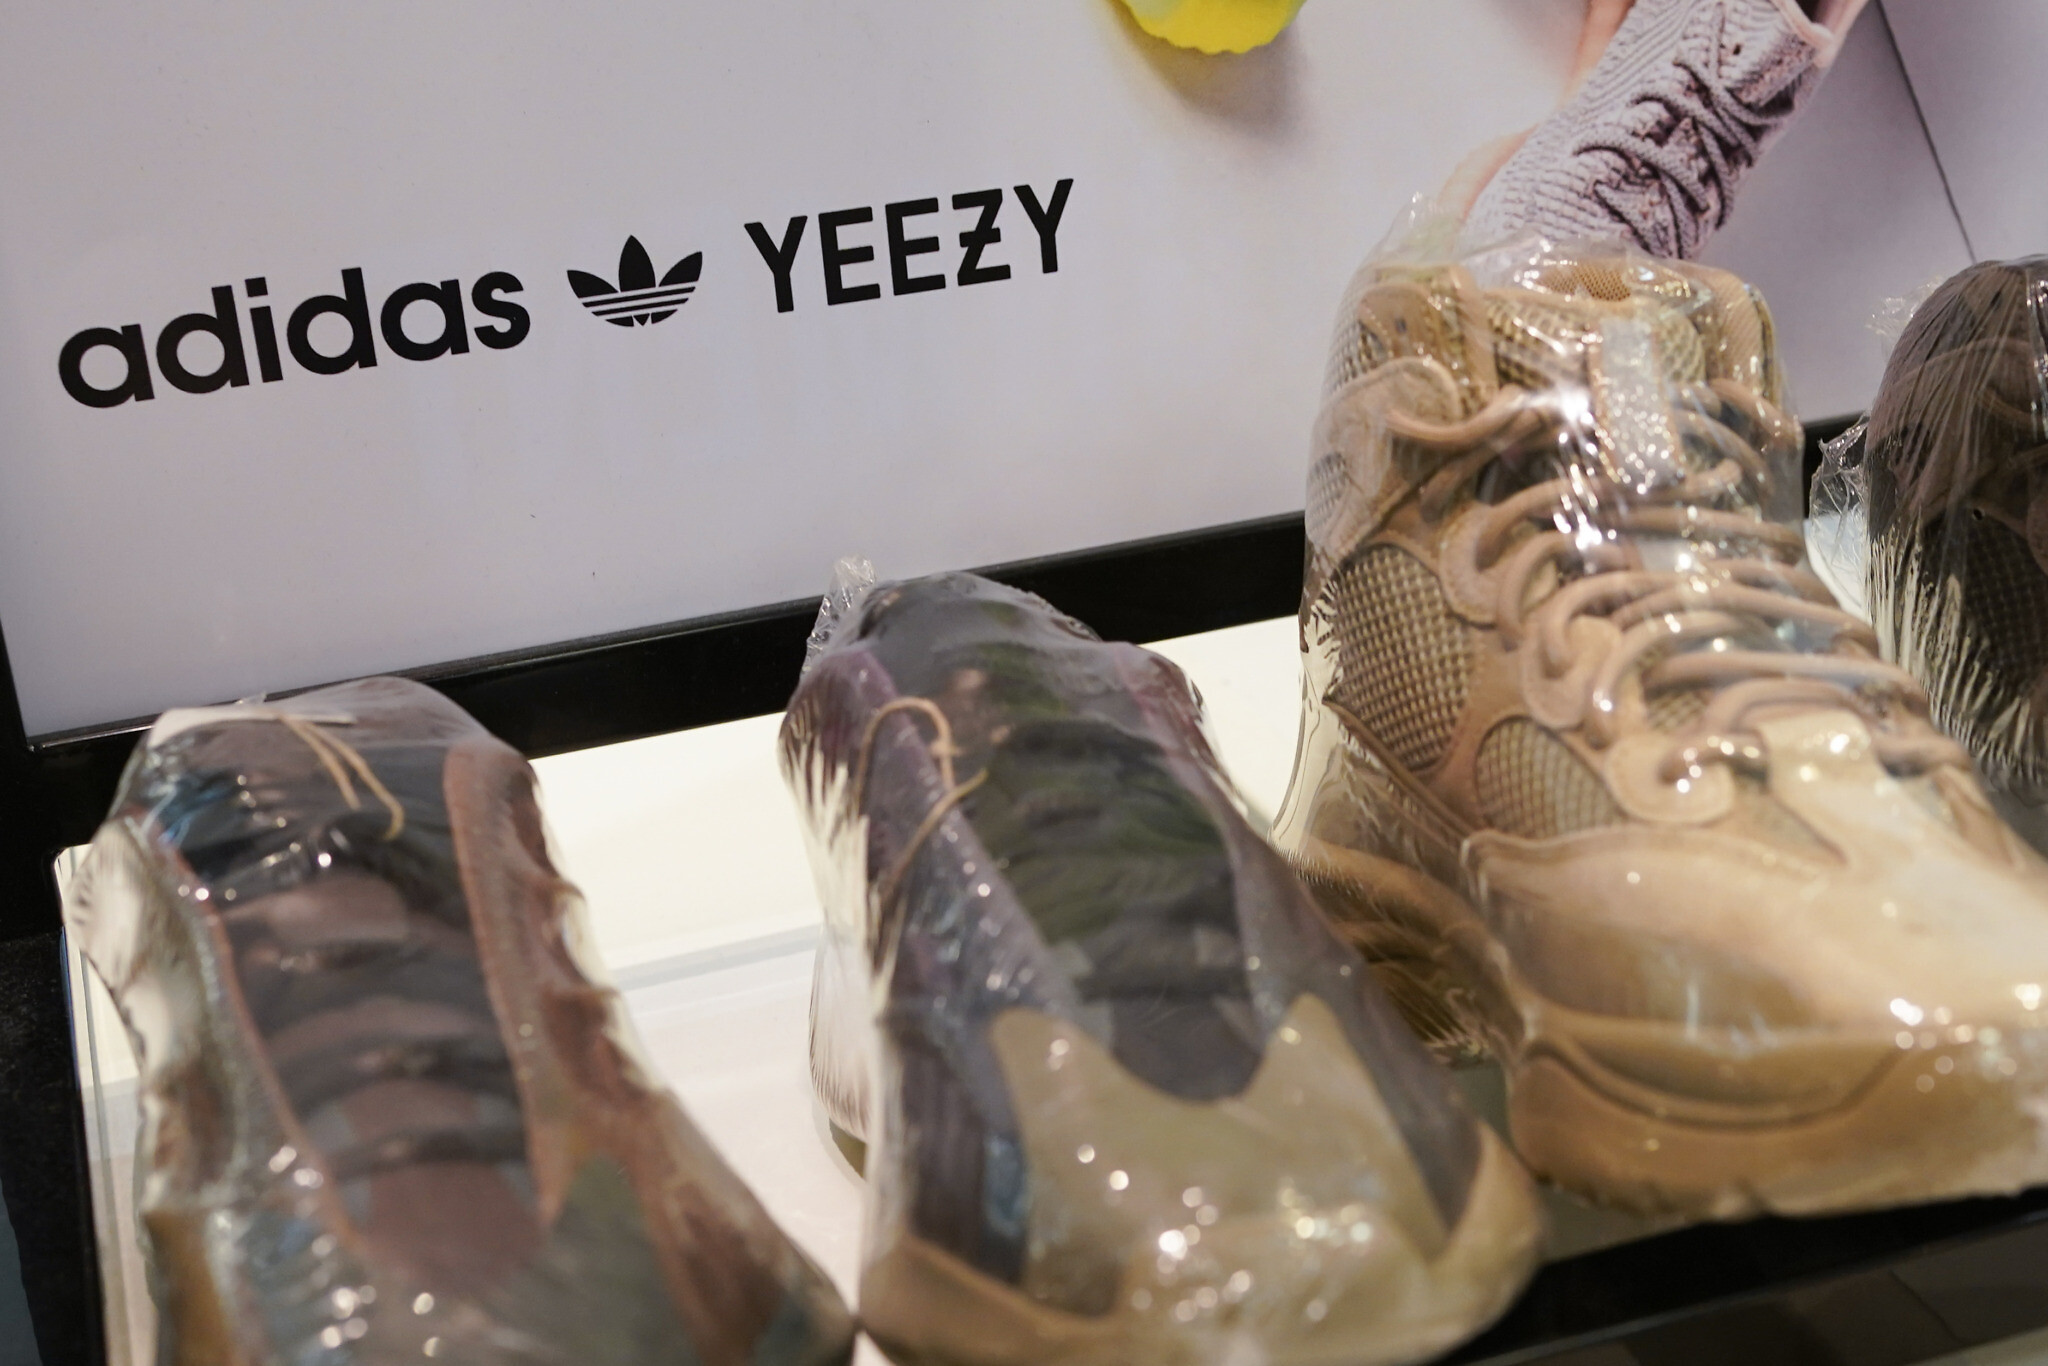 US Jews commend Adidas for surplus Yeezy sales to | Times of Israel